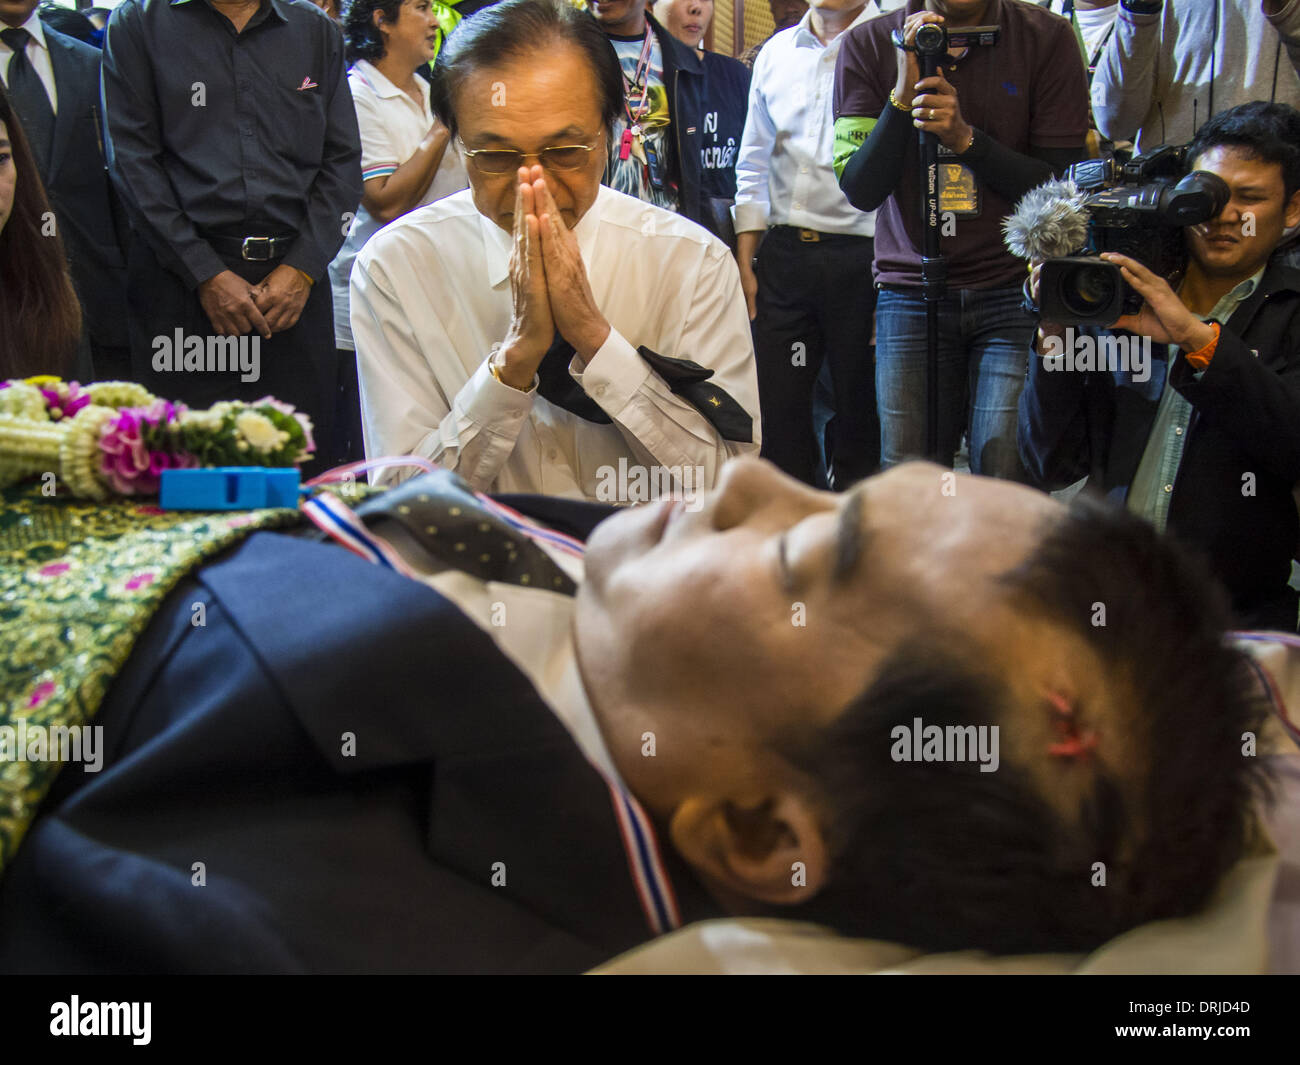 Bangkok, Thailand. 27th Jan, 2014. A man prays after pouring water during the bathing rites. Anti-government activists react to seeing the body of Suthin Taratin, with bullet wound on head, during bathing rites for Suthin at Wat Sommanat Rajavaravihara in Bangkok. Suthin was a core leader of the People's Democratic Force to Overthrow Thaksinism (Pefot), one of several organizations leading protests against the elected government of Thai Prime Minister Yingluck Shinawatra. Credit:  ZUMA Press, Inc./Alamy Live News Stock Photo